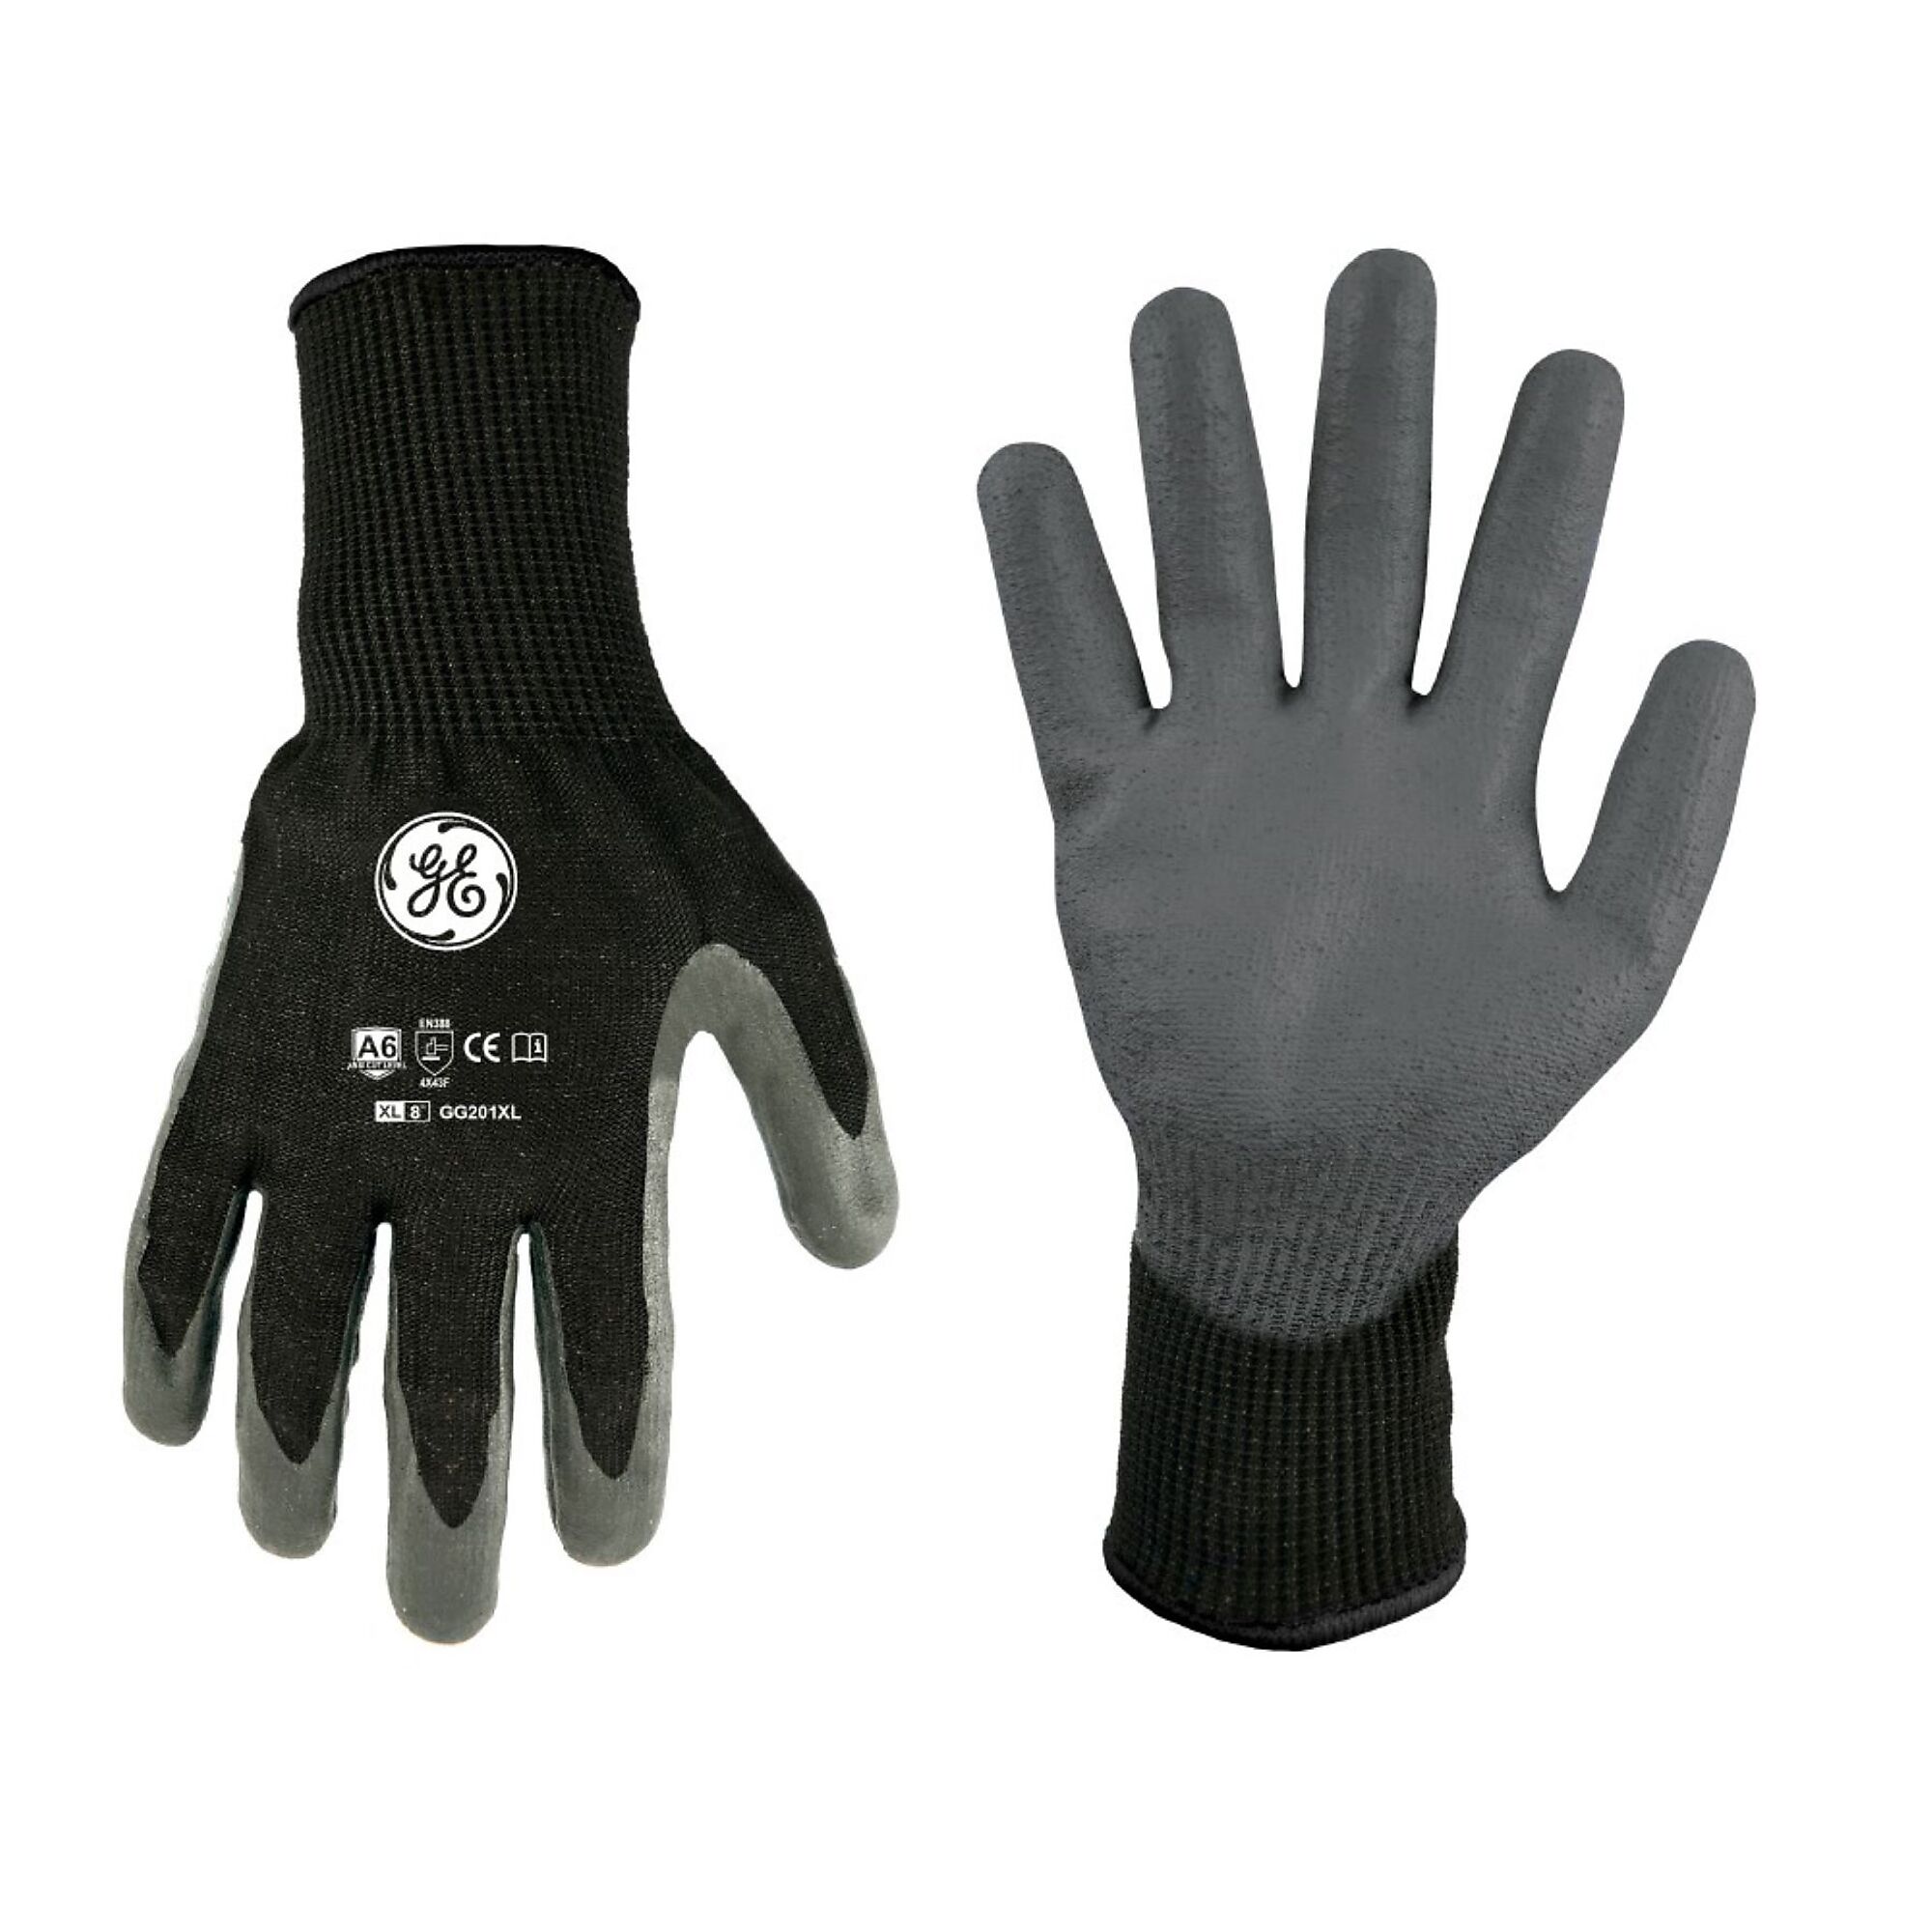 General Electric, Cut Resistant Gloves Black/Gray XL 12 pair, Size XL, Color Black, Included (qty.) 12 Model GG201XL